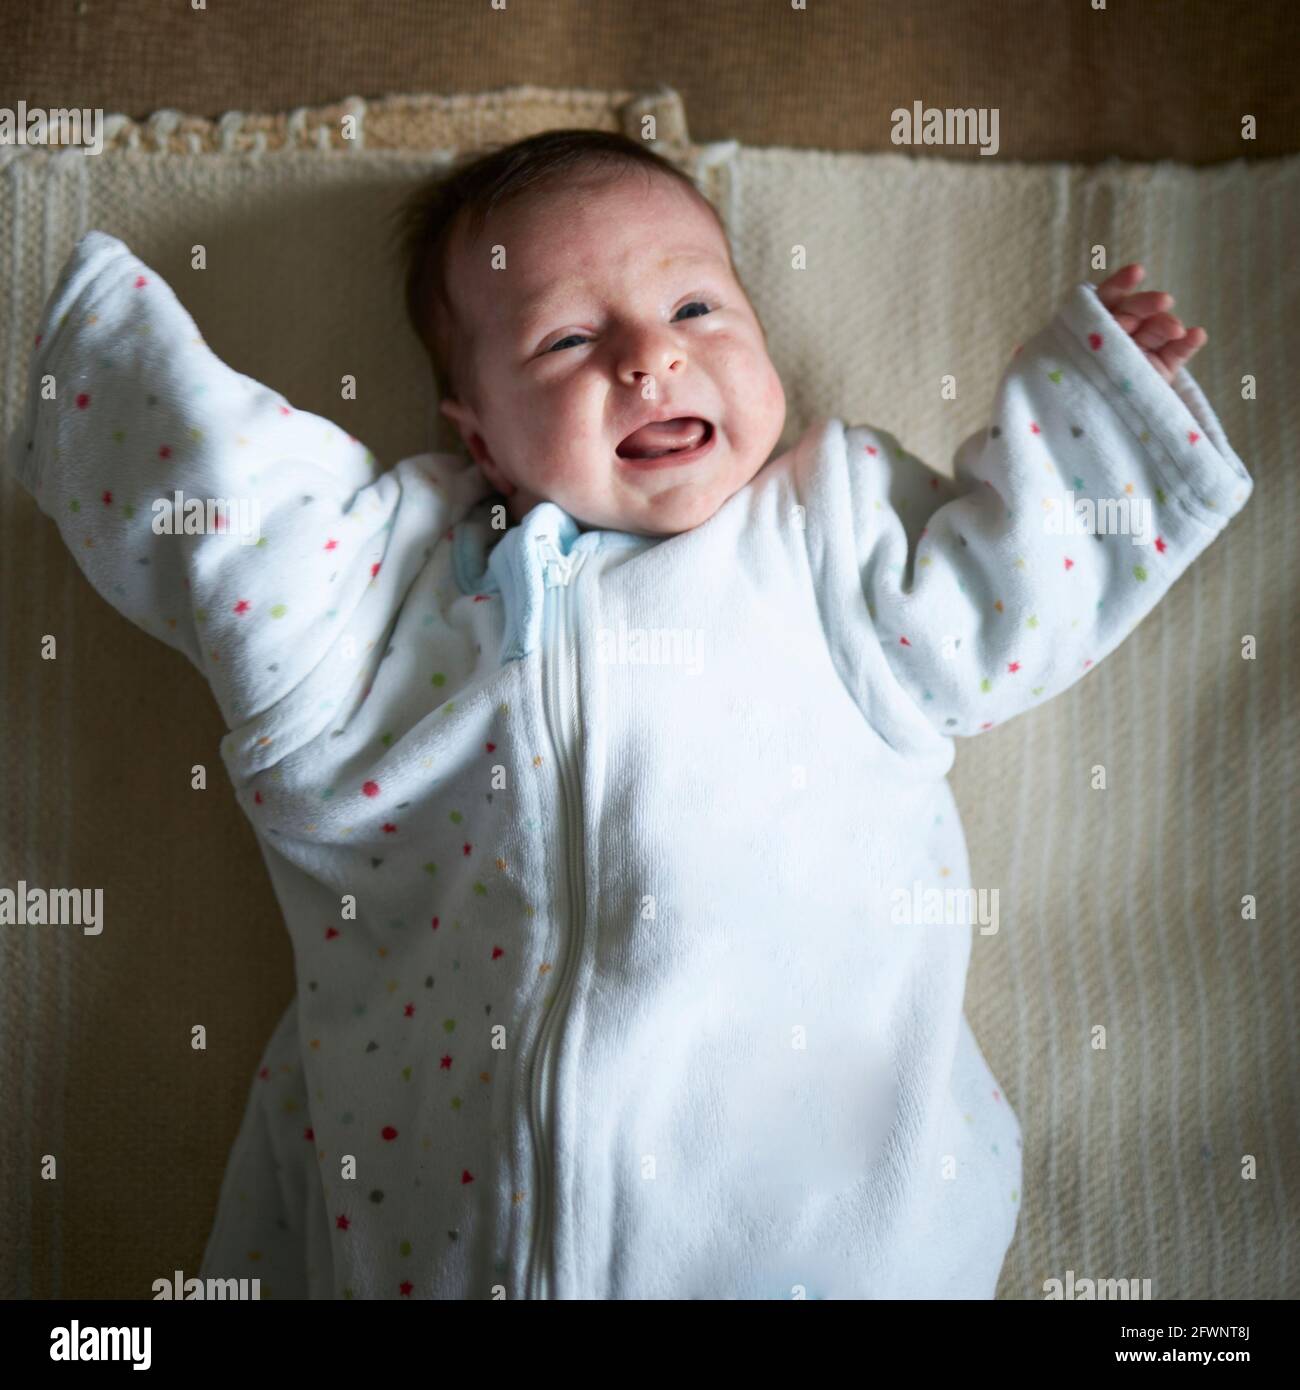 Crying baby in a oversized clothes Stock Photo